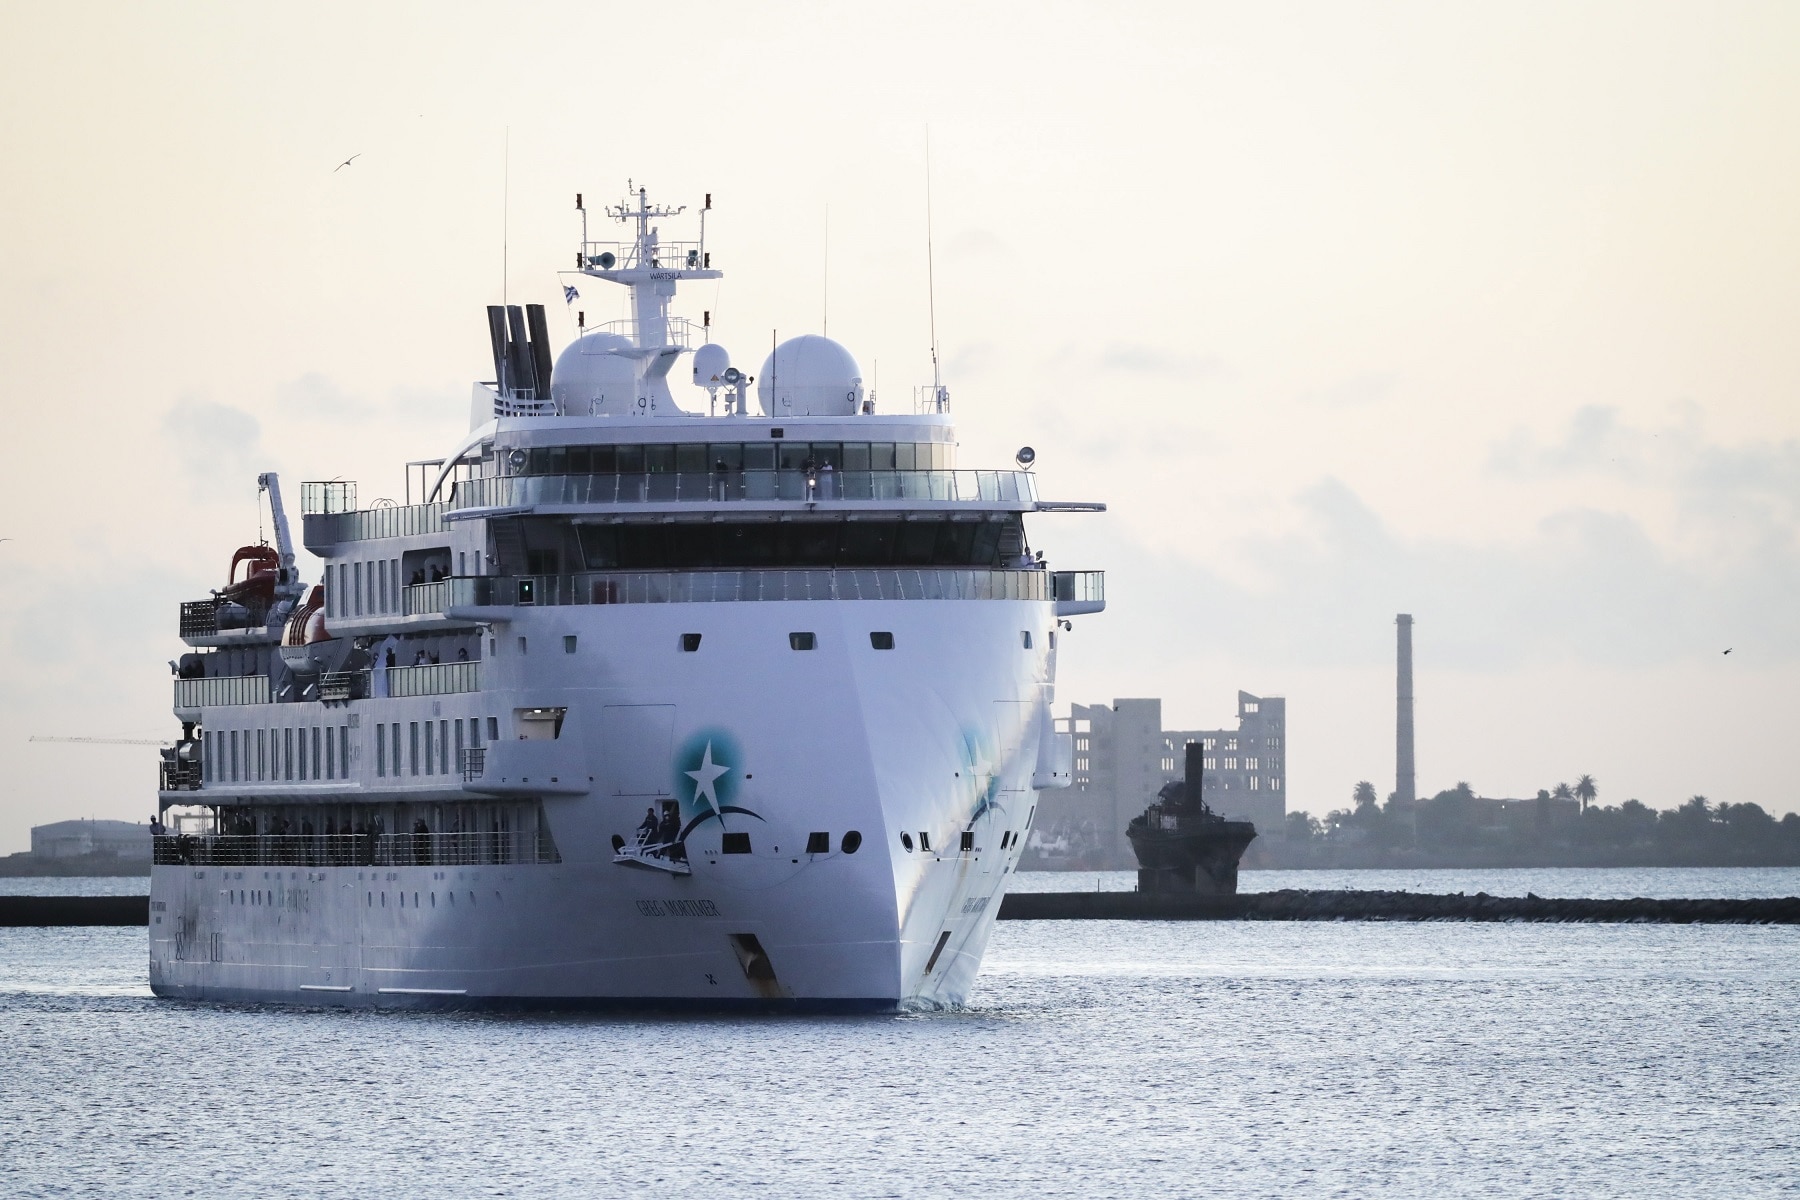 The Greg Mortimer cruise ship arrives at the port of Montevideo, Uruguay, 10 April 2020.  